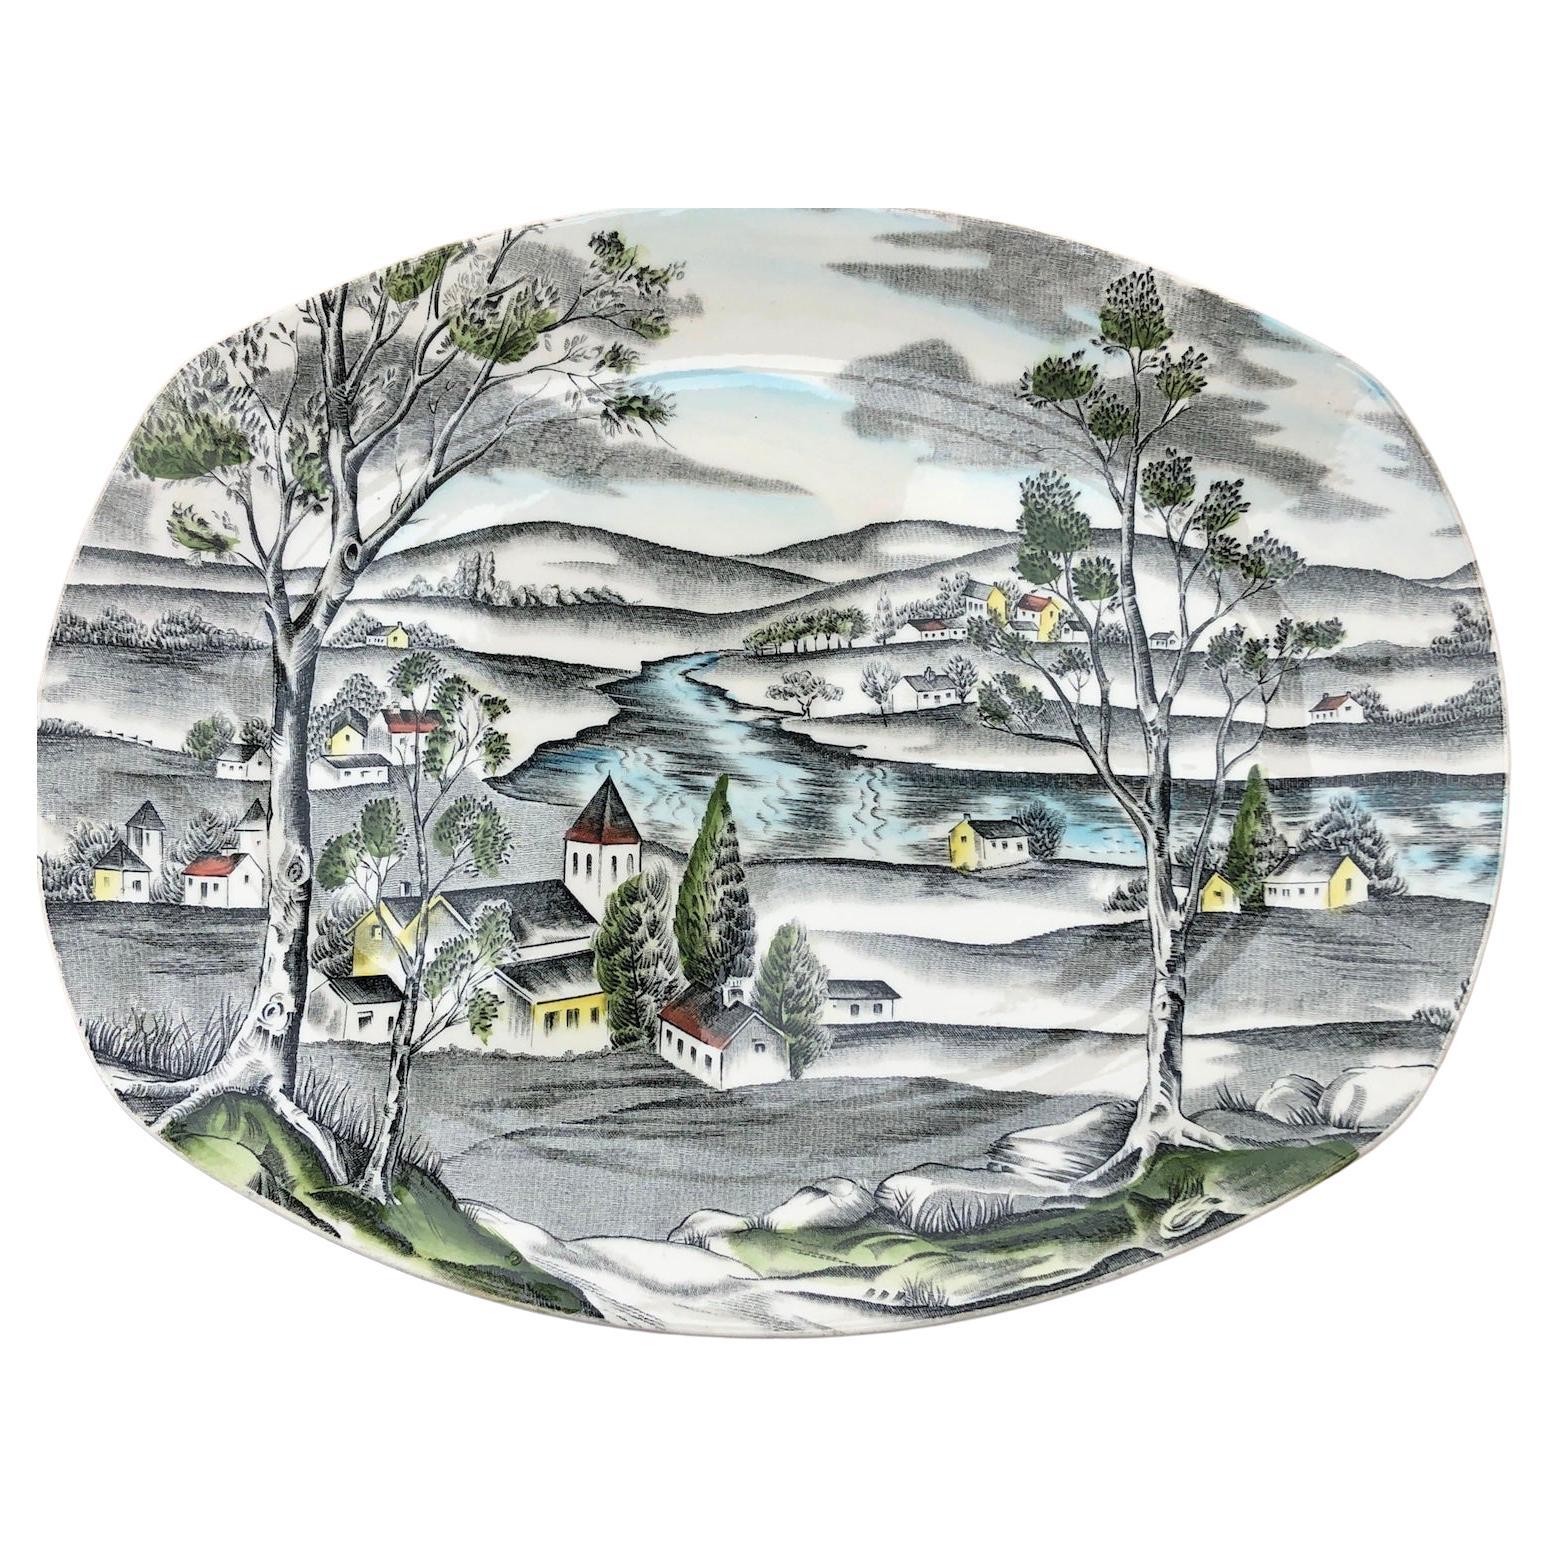 Midwinter Dinner Service ‘Happy Valley’  designed by Jessie Tait, circa 1950, 6 setting, 28 pieces (6 setting)

Rare and beautiful 28-piece dinner service designed by Jessie Tait for Midwinter Stylecraft range.

The pattern itself depicts a country